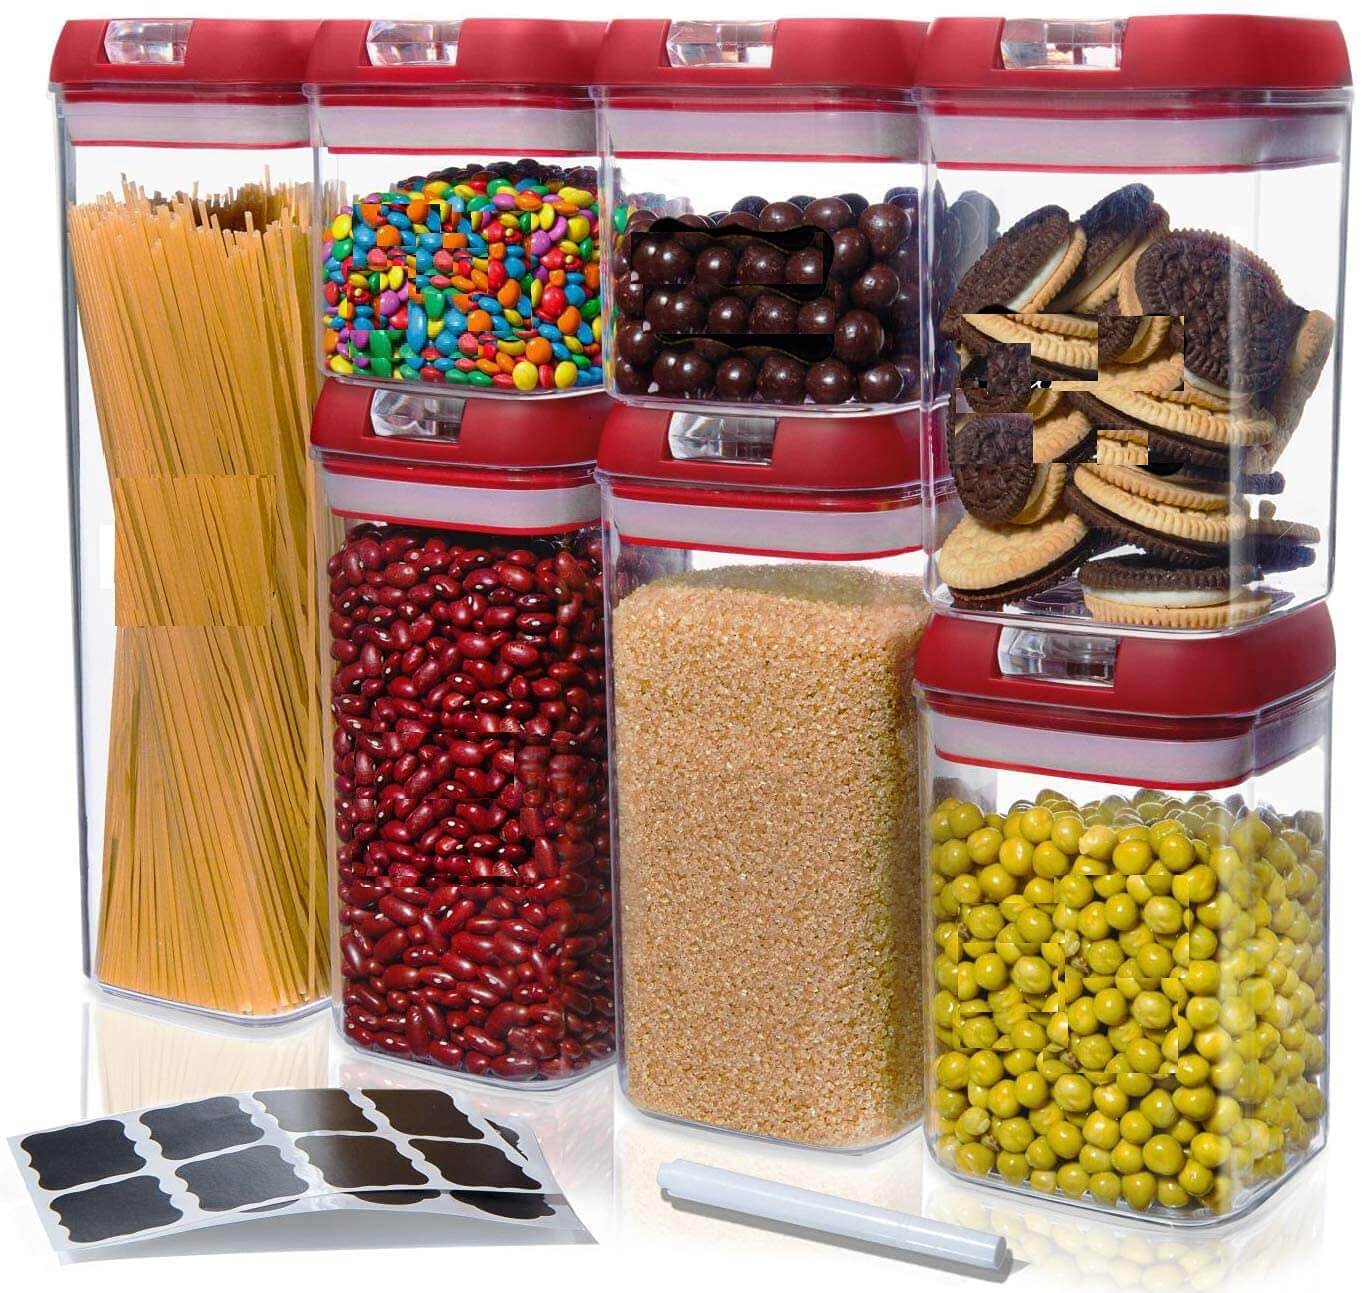 https://cdn.shopify.com/s/files/1/2091/6511/products/cheer-collection-set-of-7-airtight-food-storage-containers-heavy-duty-pantry-organizer-bins-bpa-free-plastic-containers-plus-dry-erase-marker-and-labels-red-407410.jpg?v=1671777929